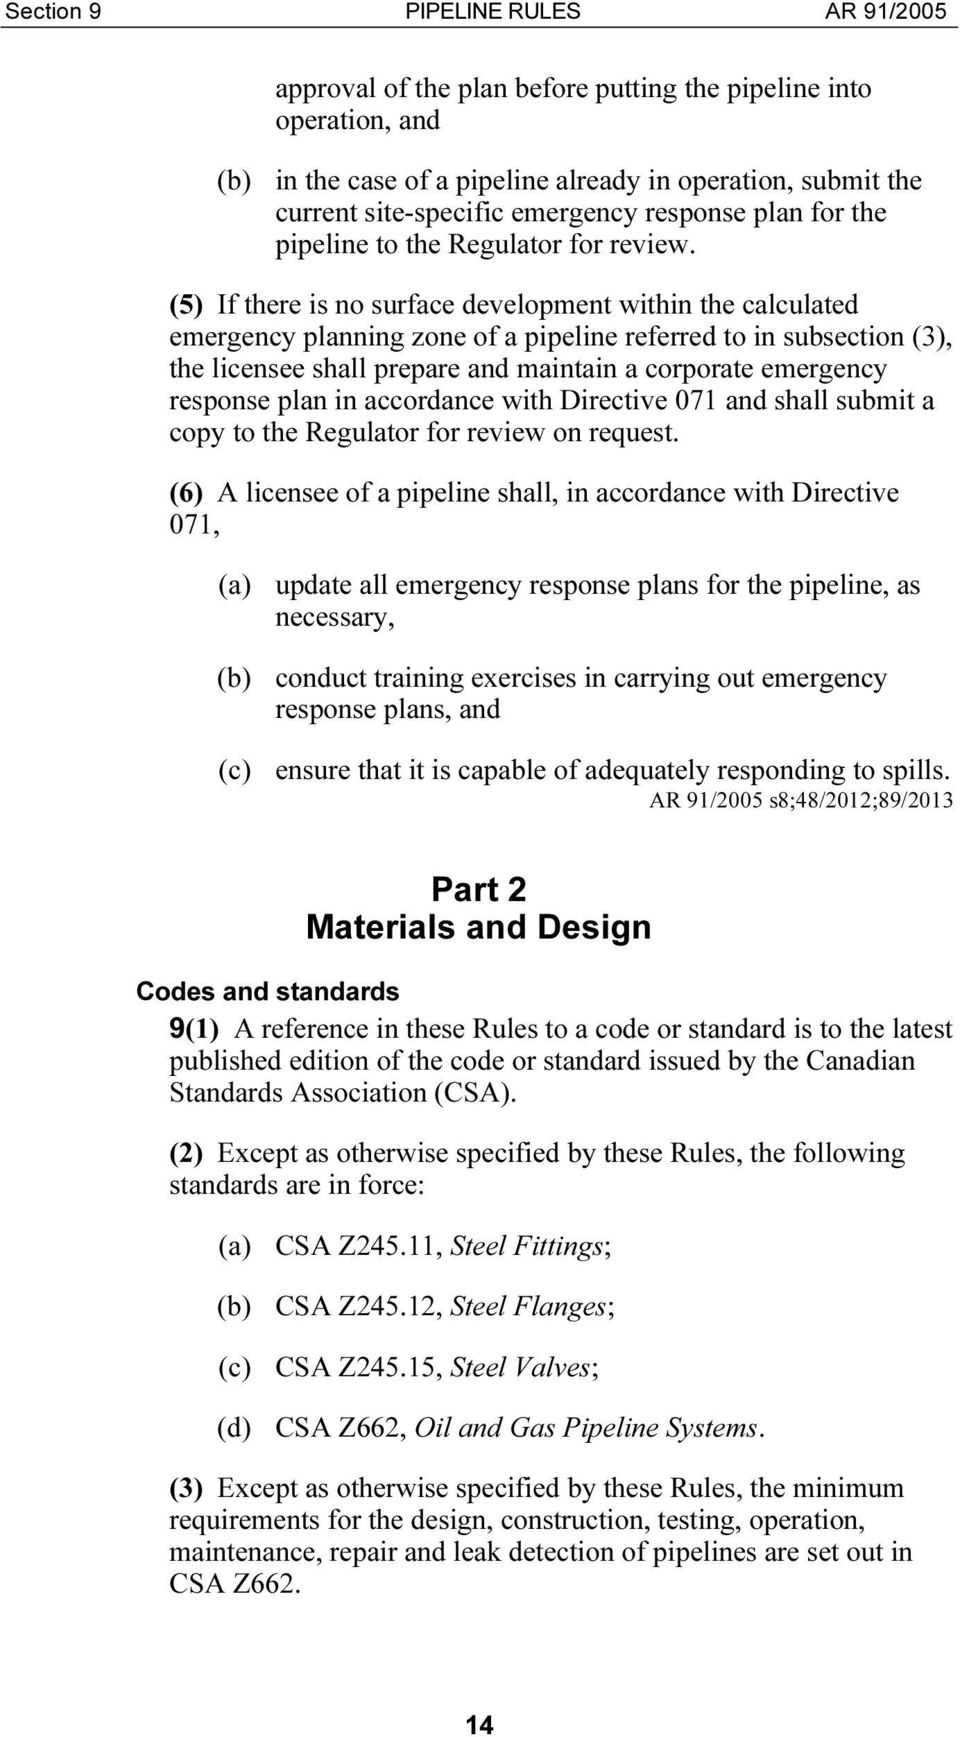 (5) If there is no surface development within the calculated emergency planning zone of a pipeline referred to in subsection (3), the licensee shall prepare and maintain a corporate emergency